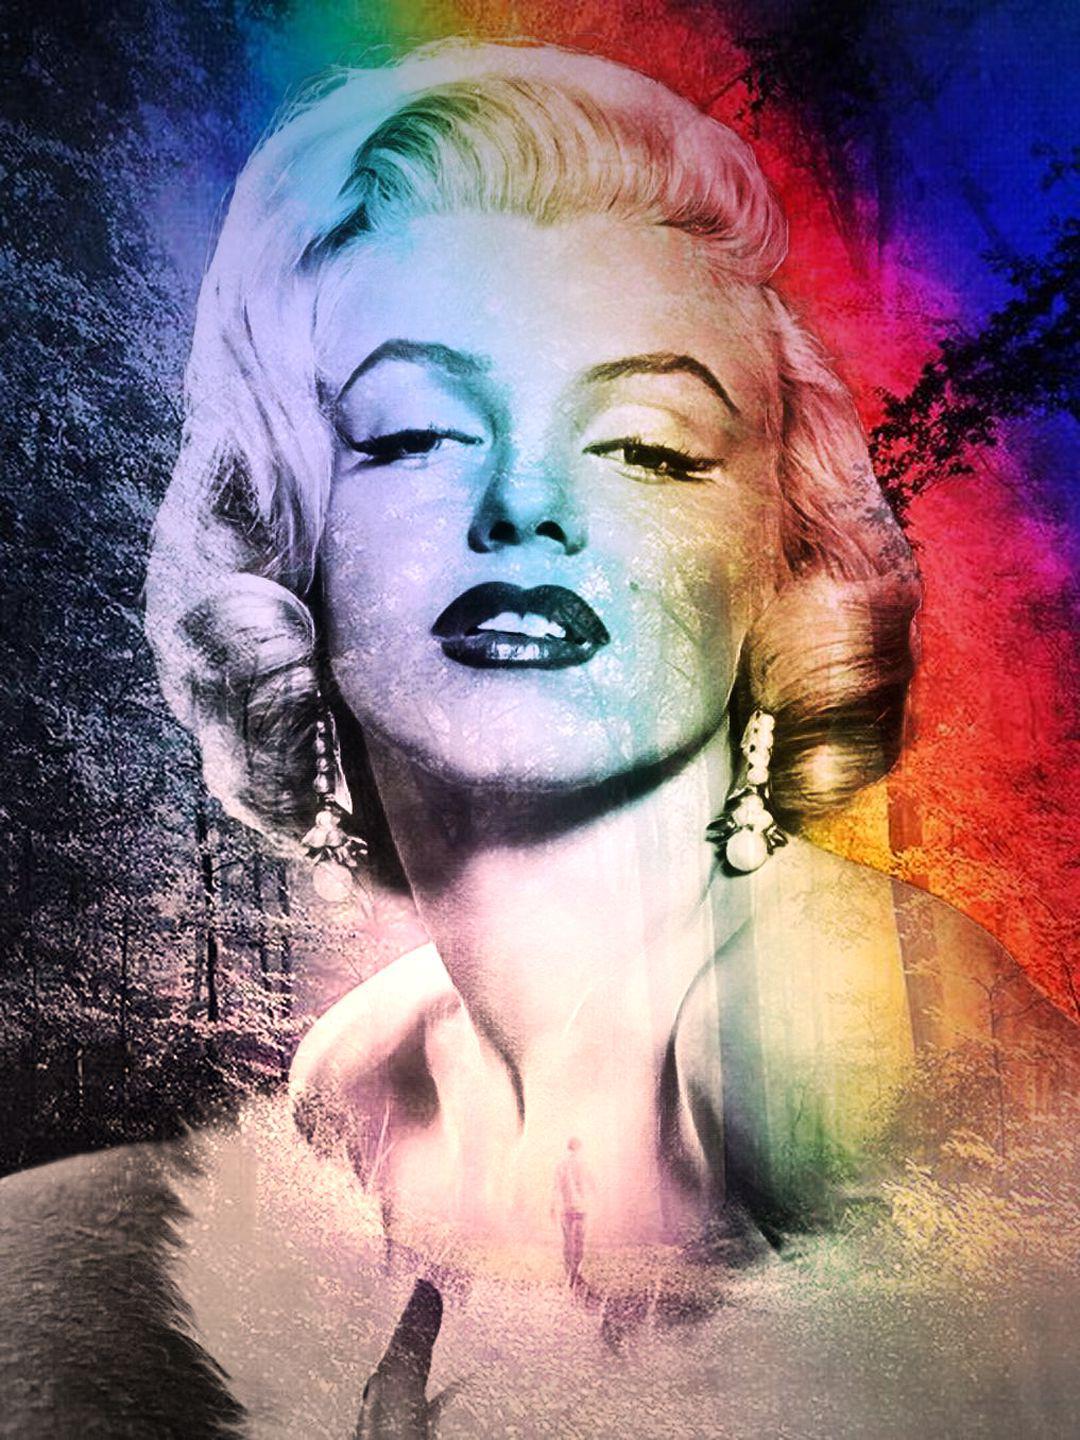 Marilyn Monroe Celeb - Beautiful Artworks of Celebrities, Footballers, Politicians and Famous People in World OpenSea